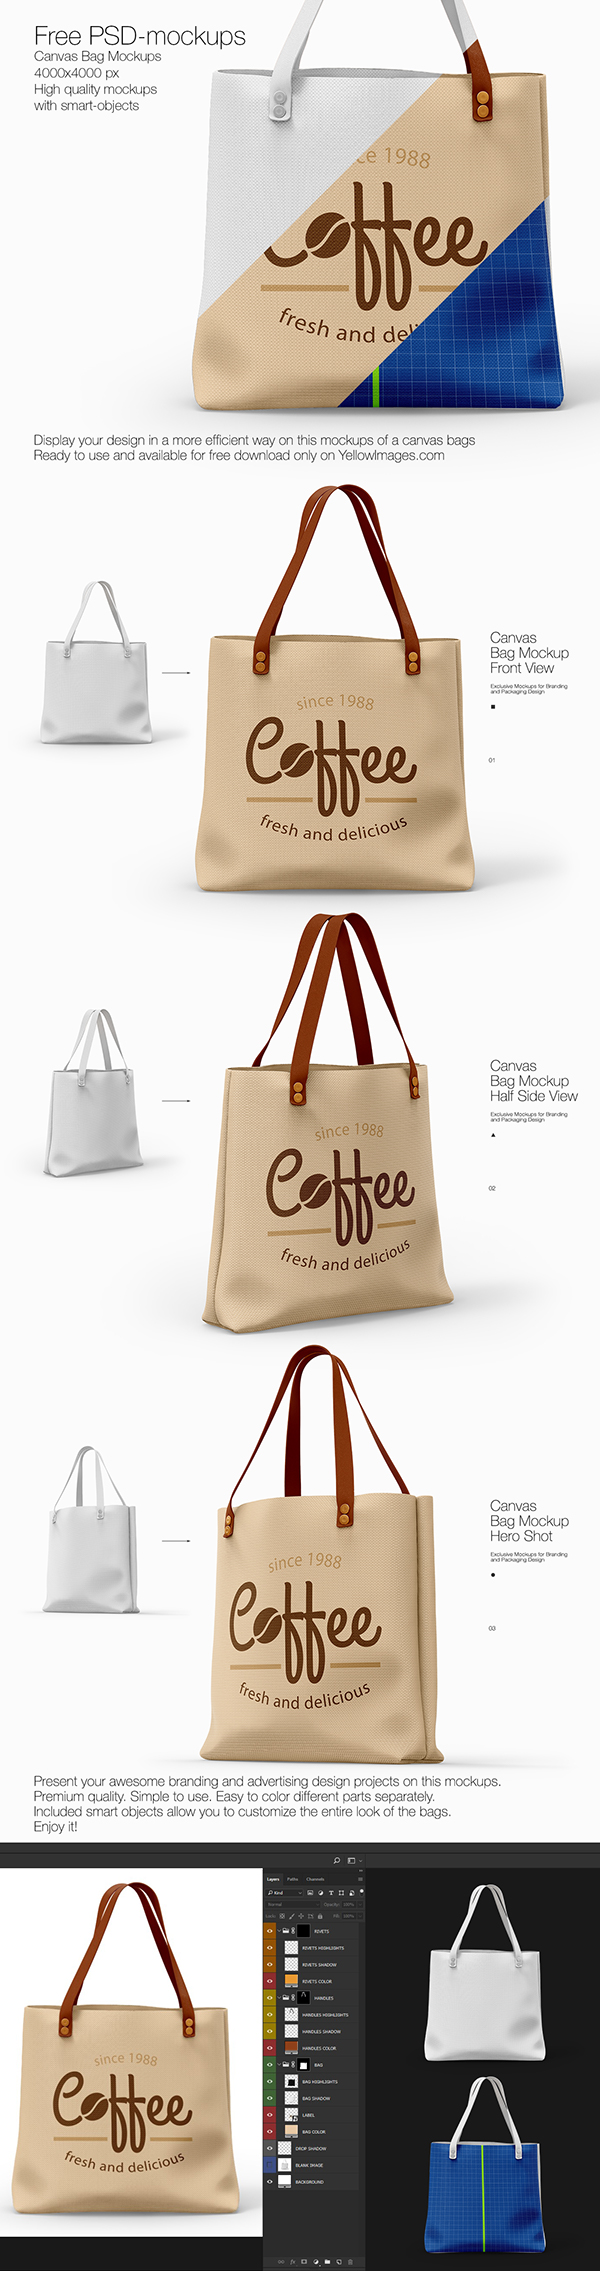 Free PSD-mockups | Canvas Bags on Behance